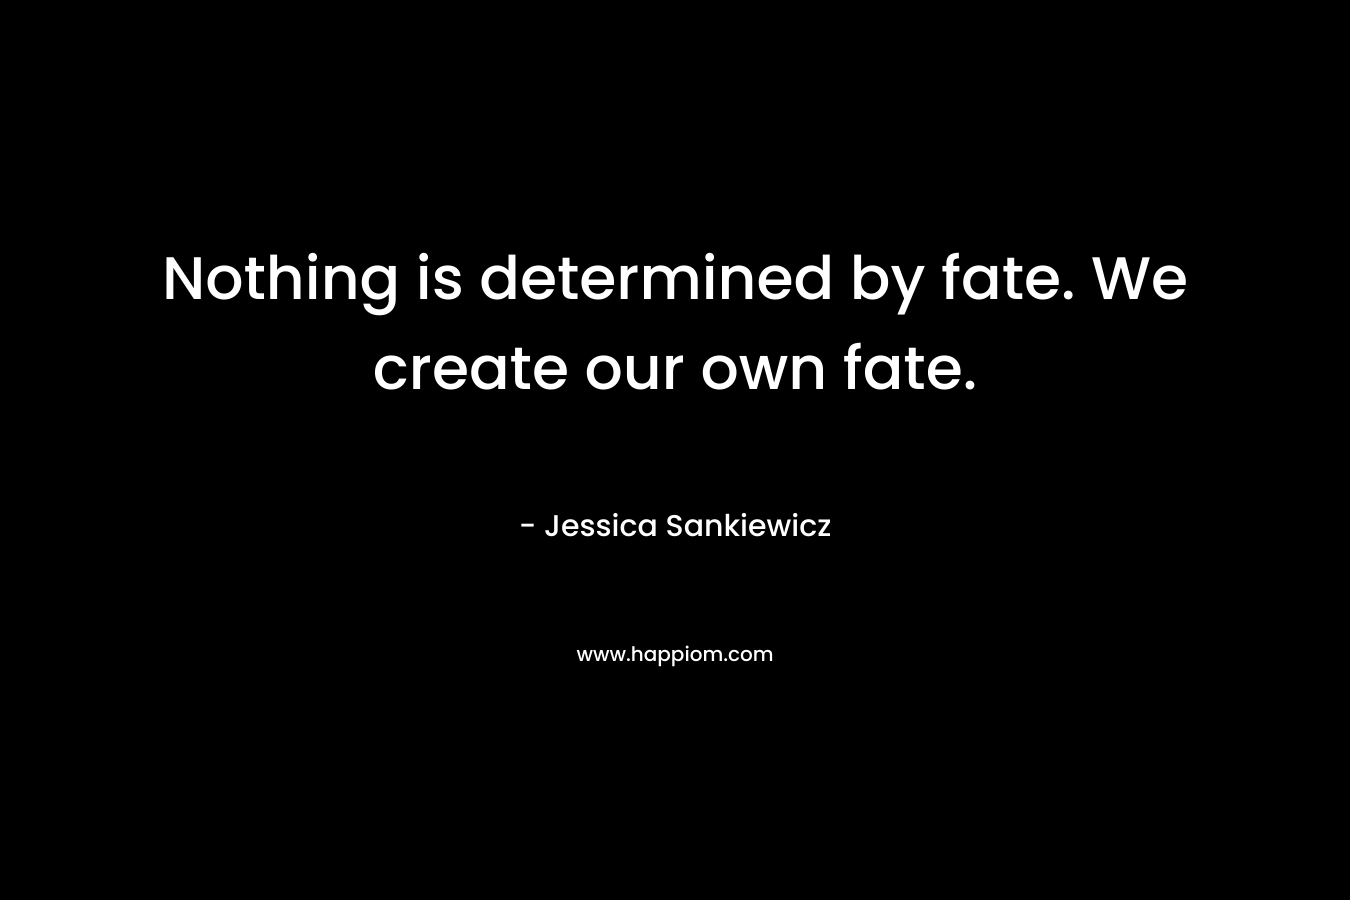 Nothing is determined by fate. We create our own fate.